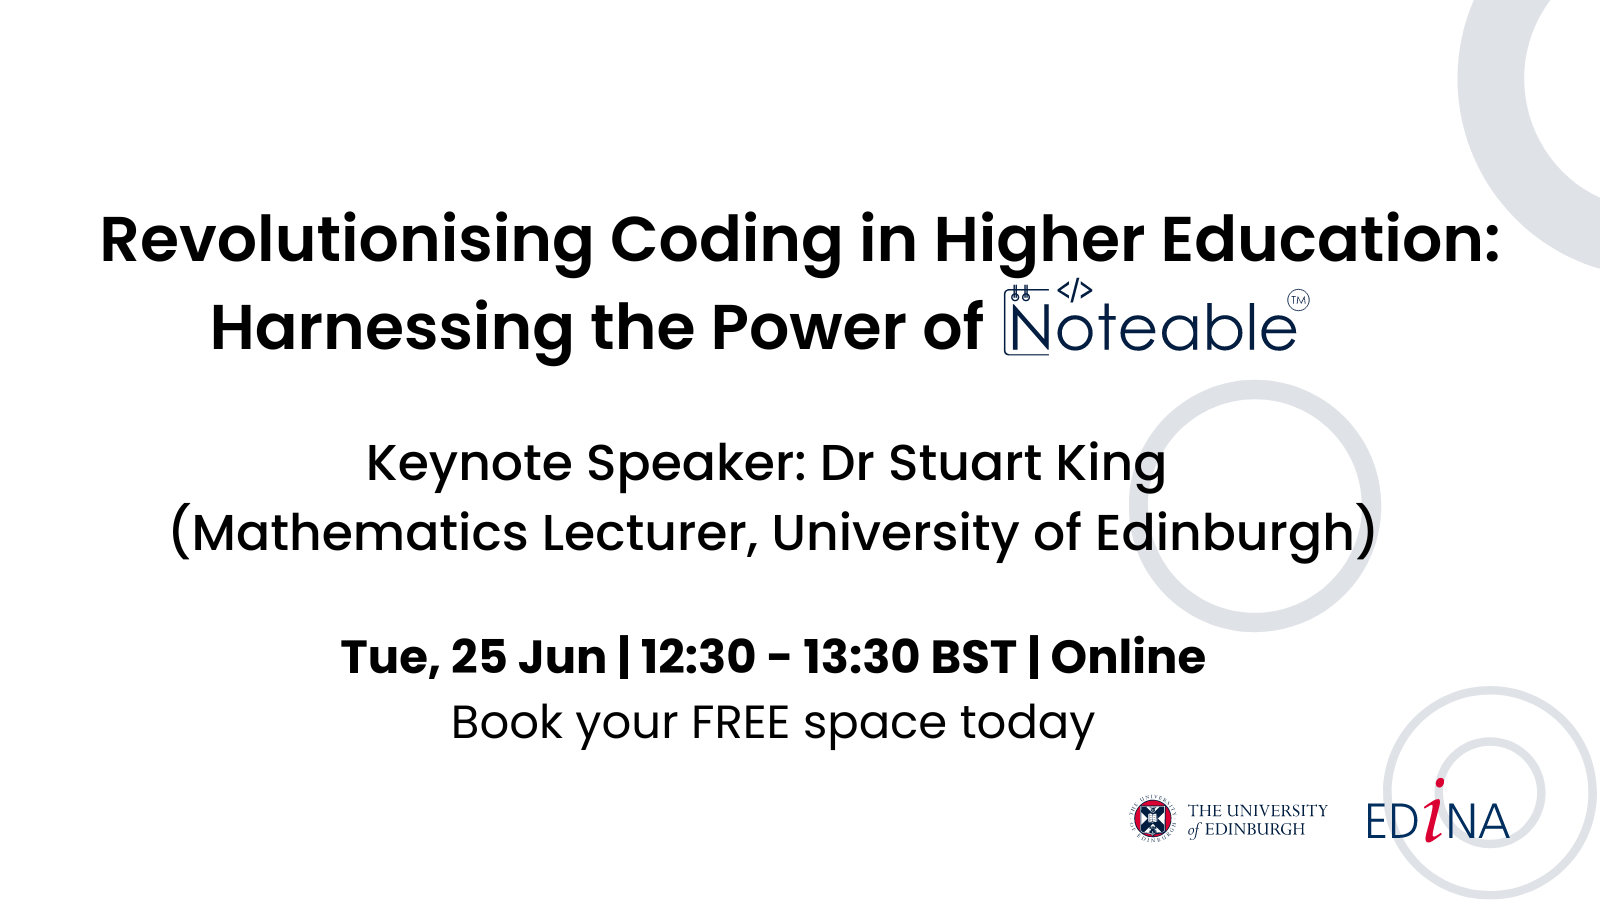 Webinar - Revolutionising Coding in Higher & Further Education, Harnessing the Power of Noteable (hosted by Dr Stuart King)